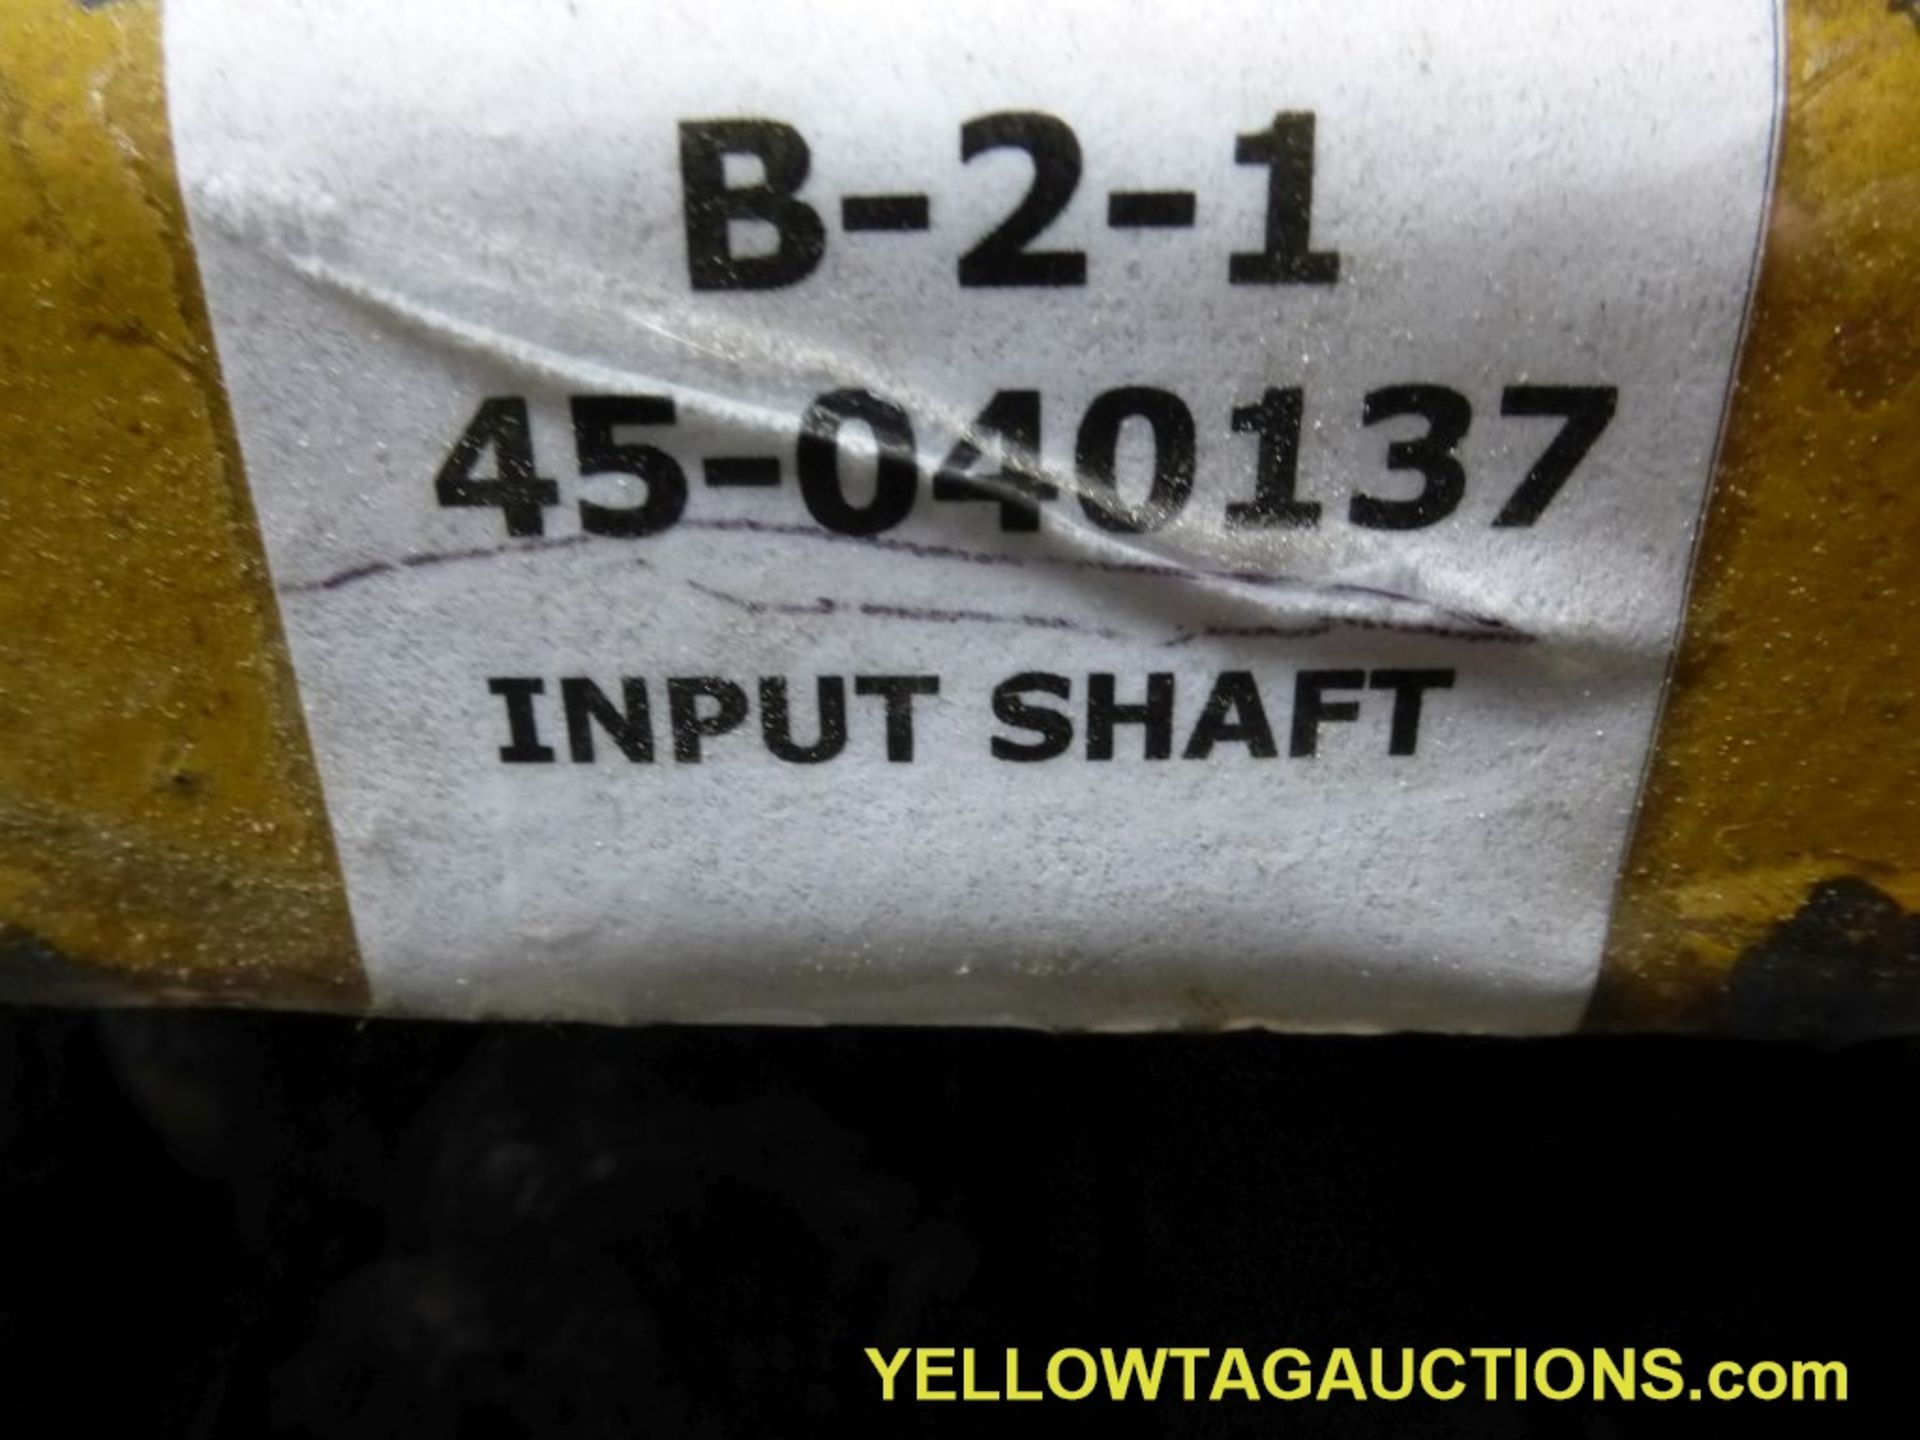 Lot of Approx. (129) Howse Input and Output Shafts|Approx. (19) Input, 6 Spline, Part No. 45-040137; - Image 4 of 7